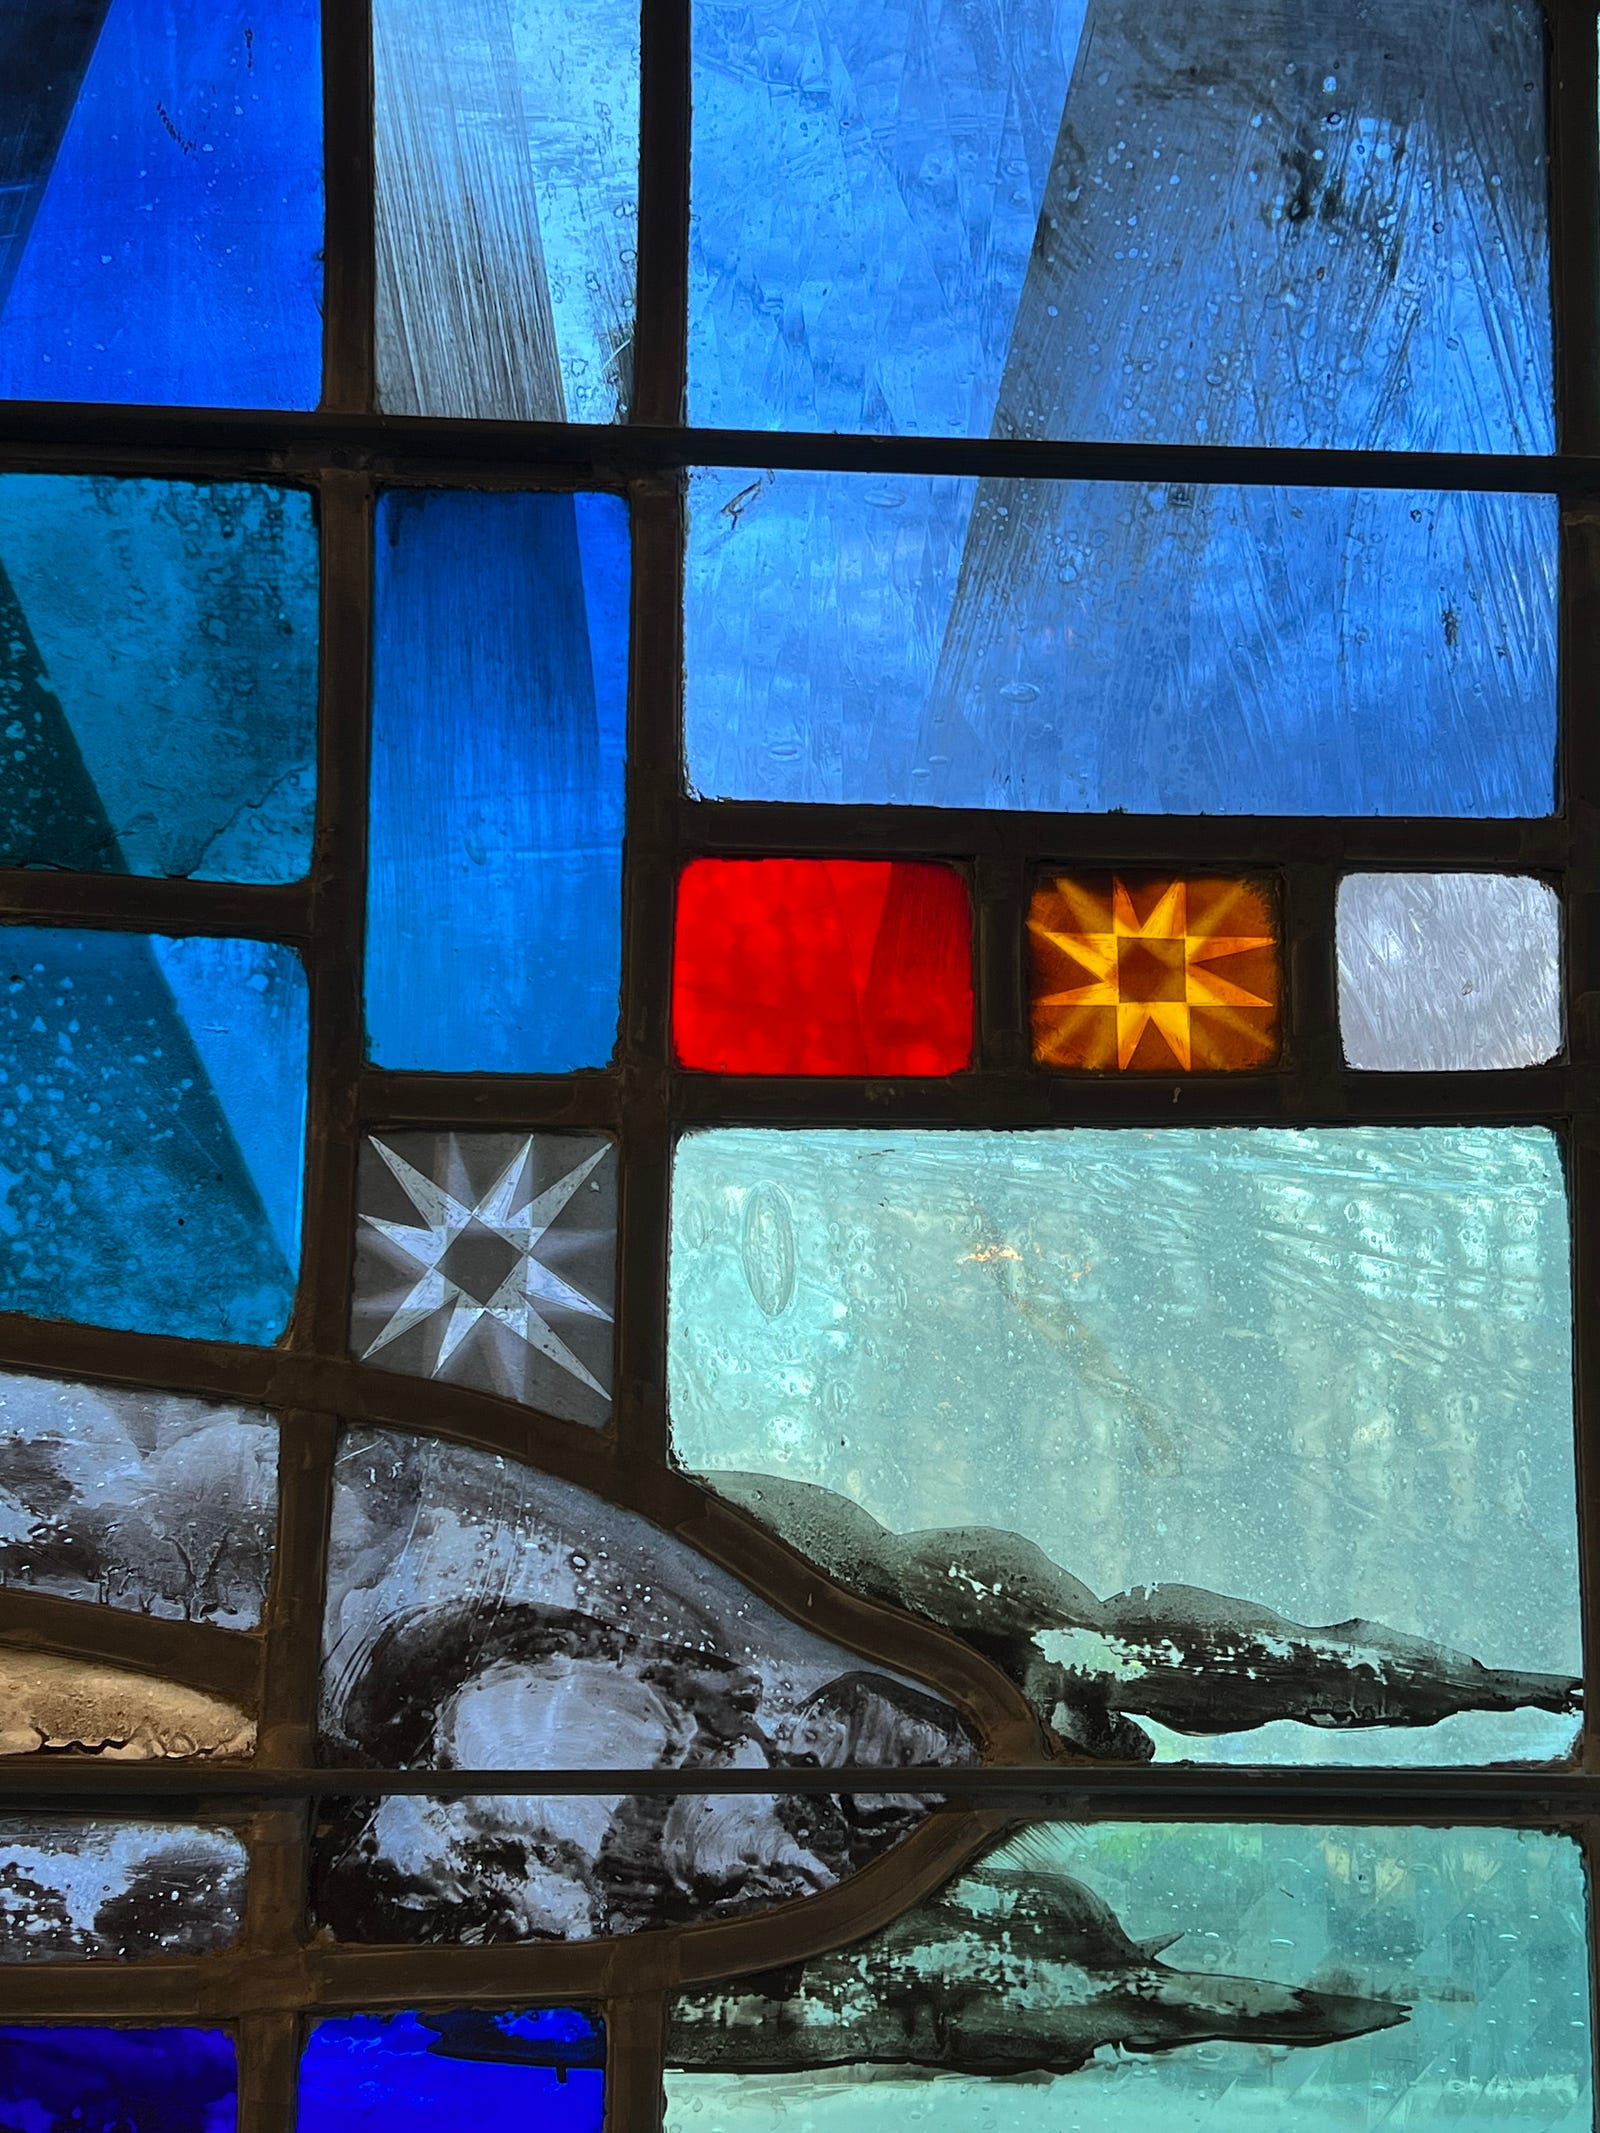 Photo of a piece of the Altar window at St Andrew’s Madison, CT showing, what seems to be, two bullet holes.